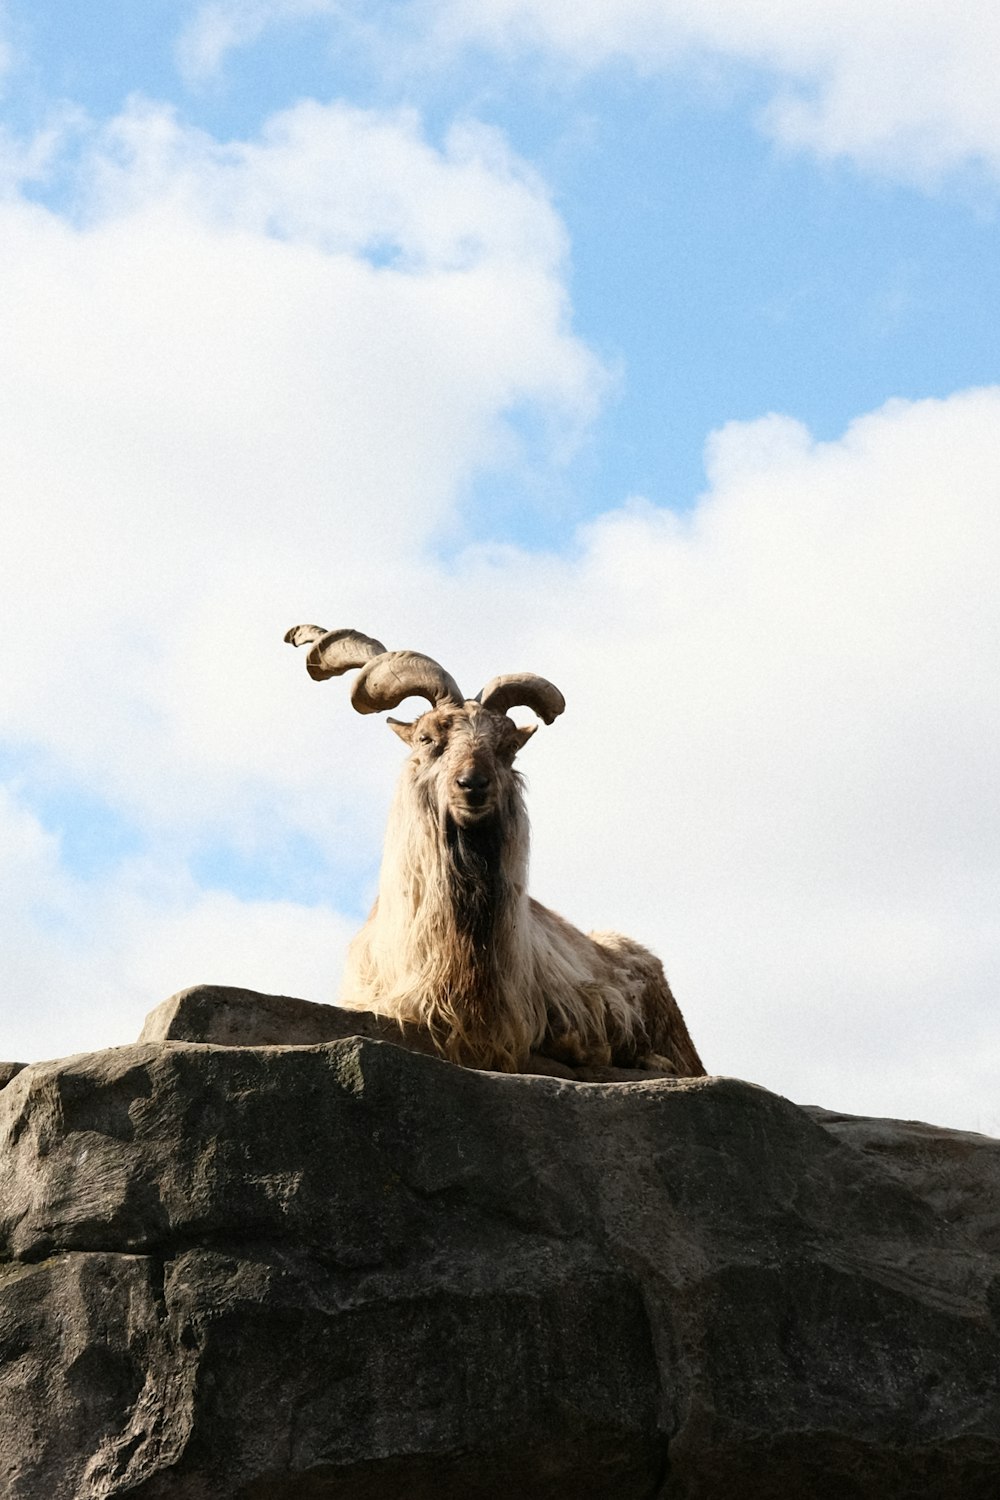 a goat sitting on top of a large rock